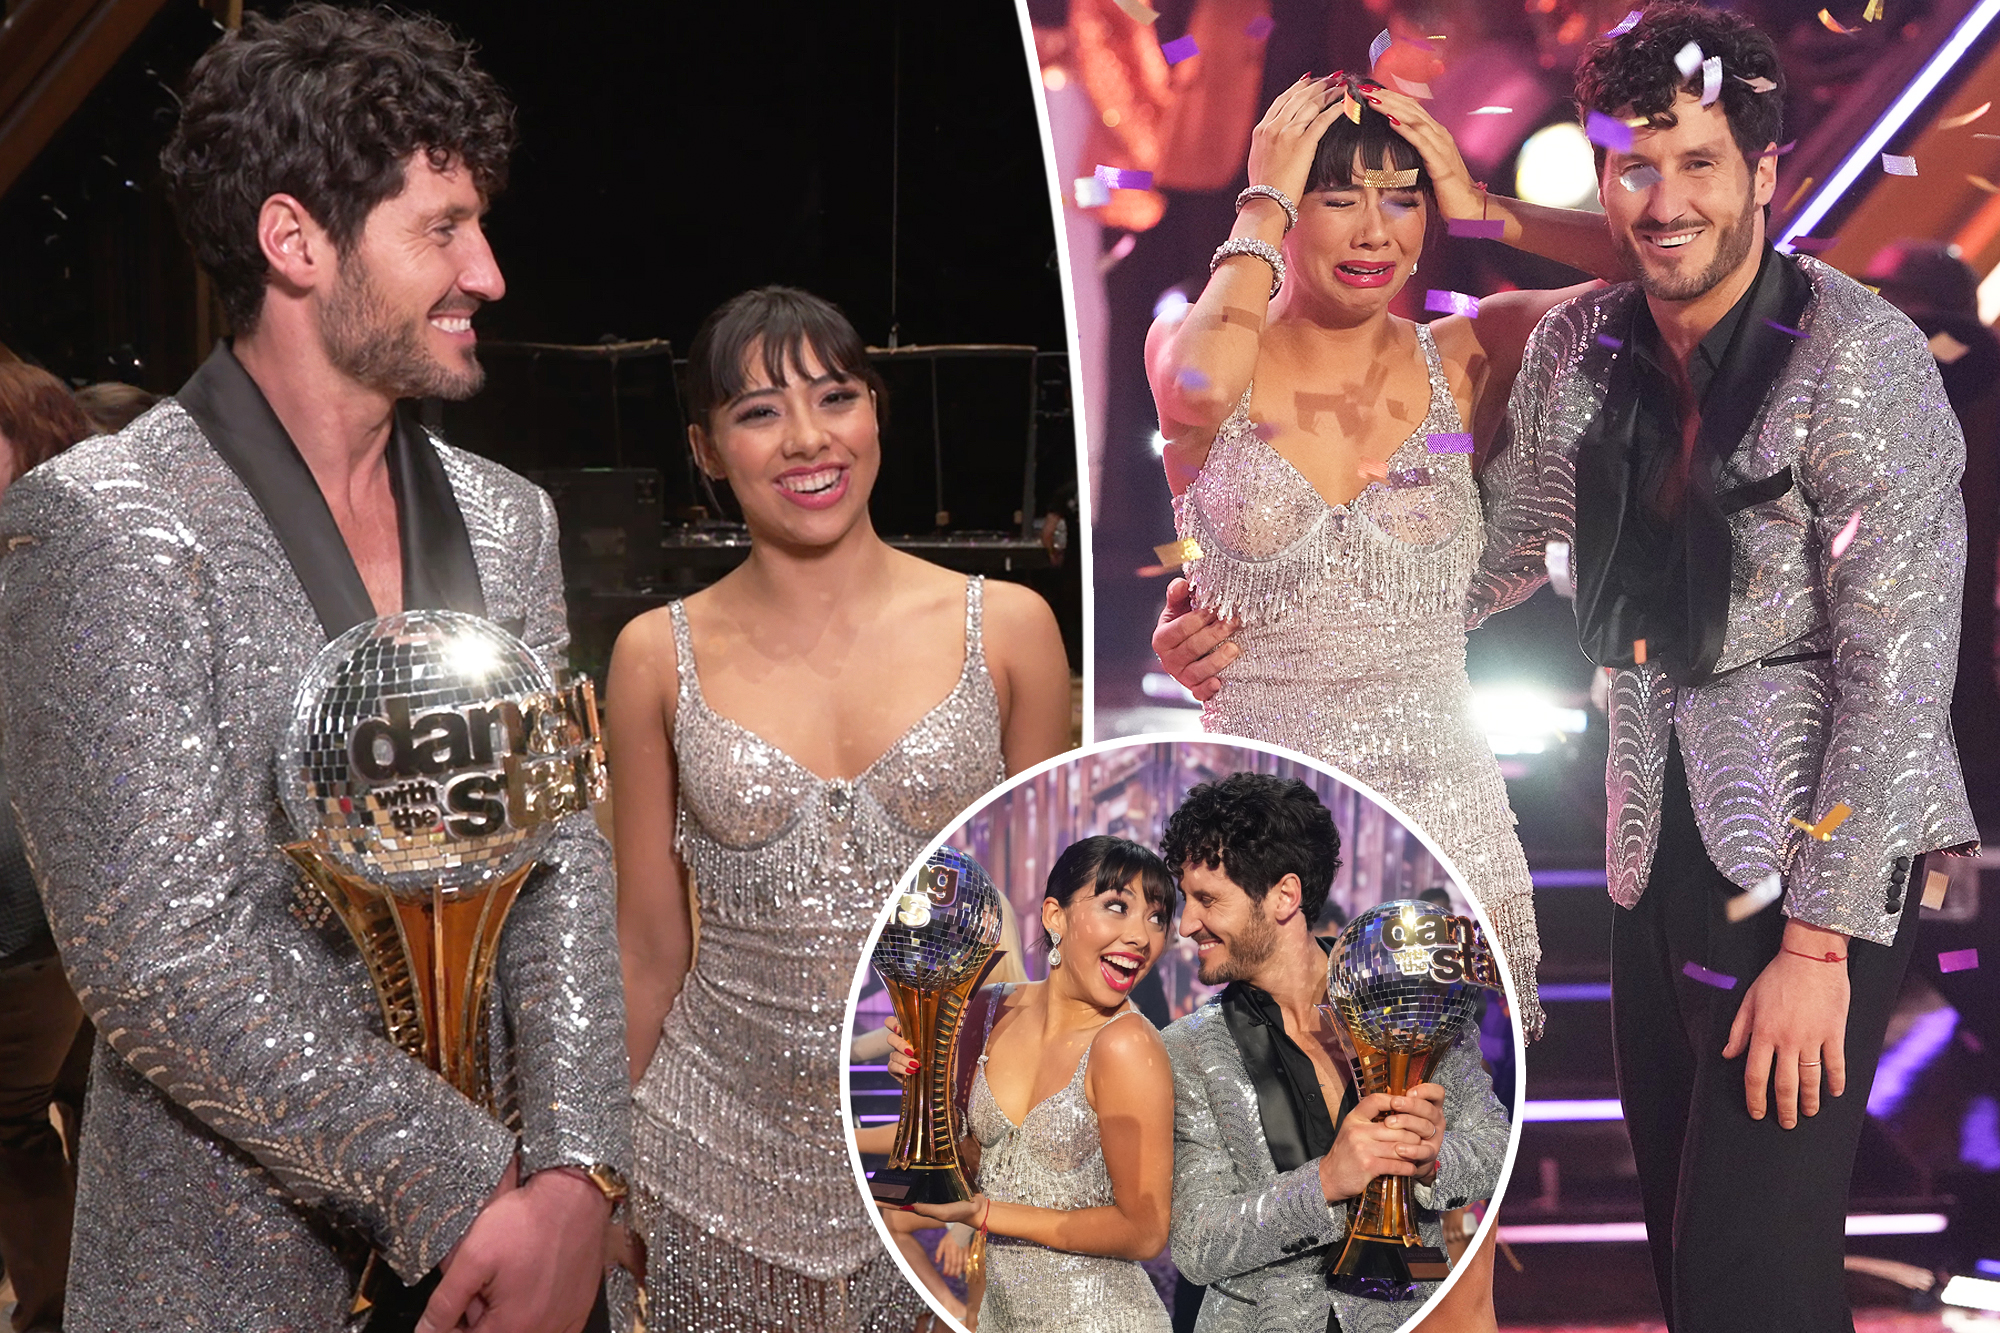 ‘Dancing With the Stars’ champs Xochitl Gomez, Val Chmerkovskiy react to first mirrorball win honoring Len Goodman